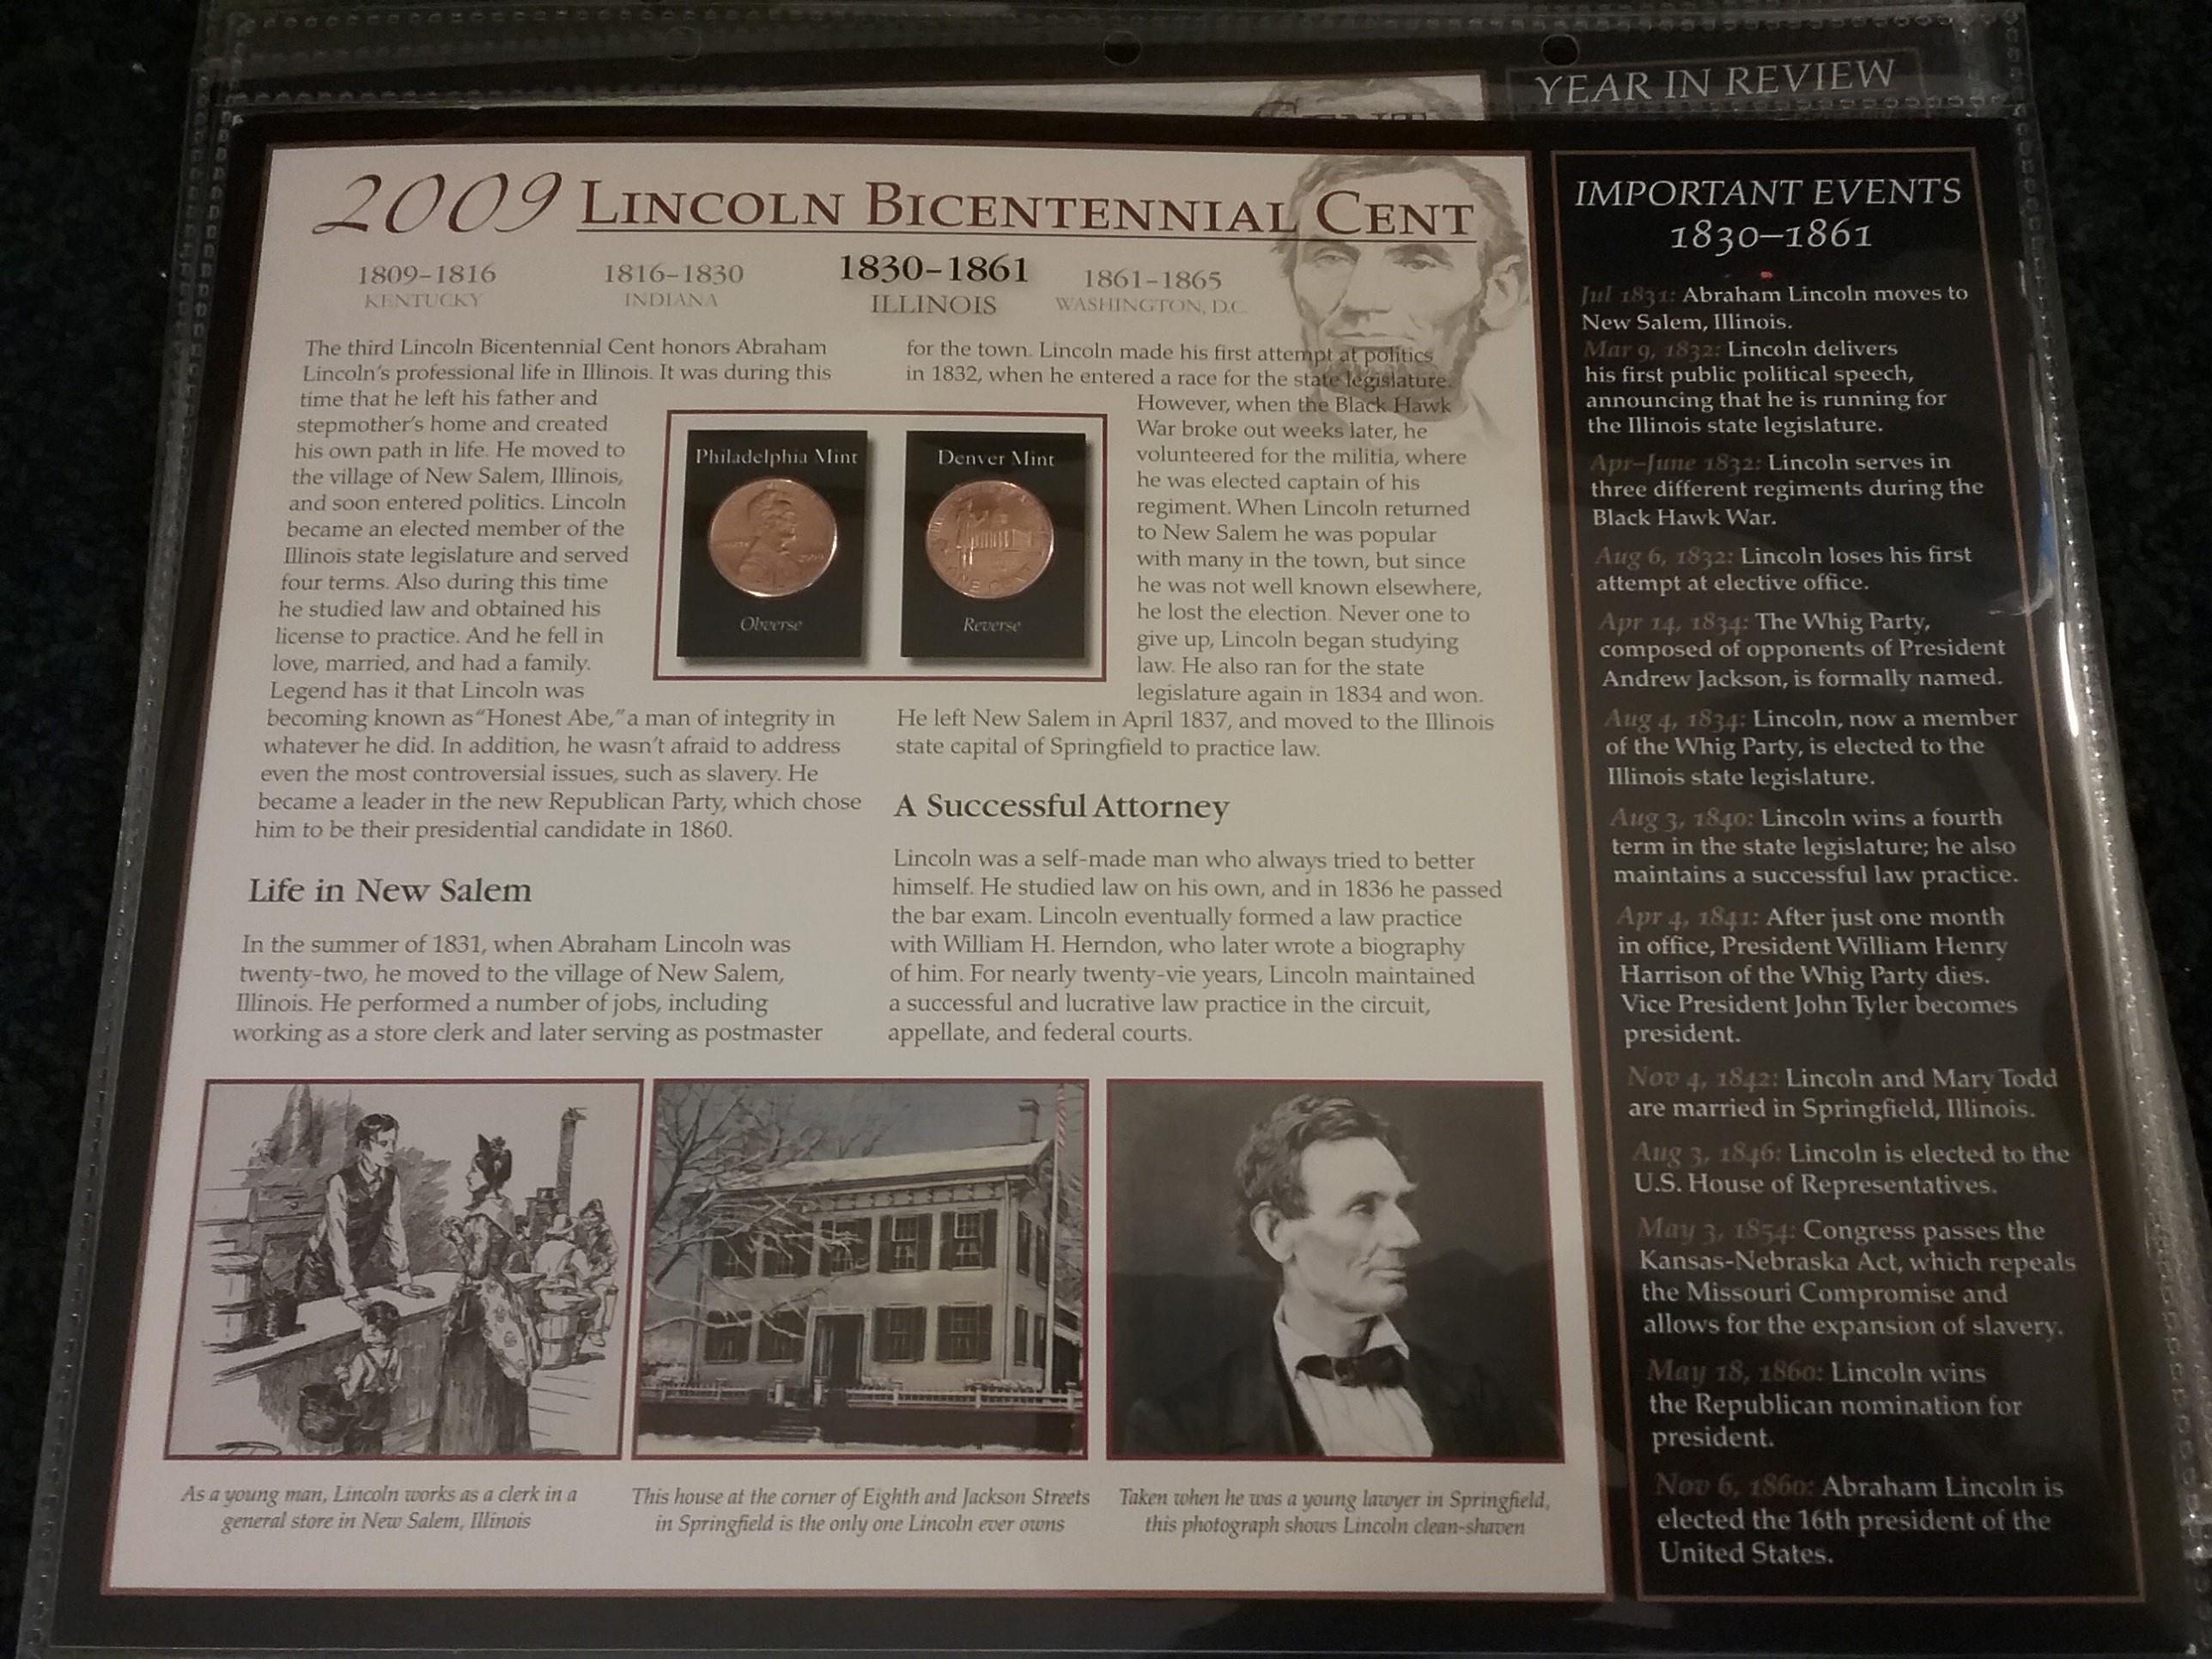 Six sets of Lincoln Bicentennial Cent Collection